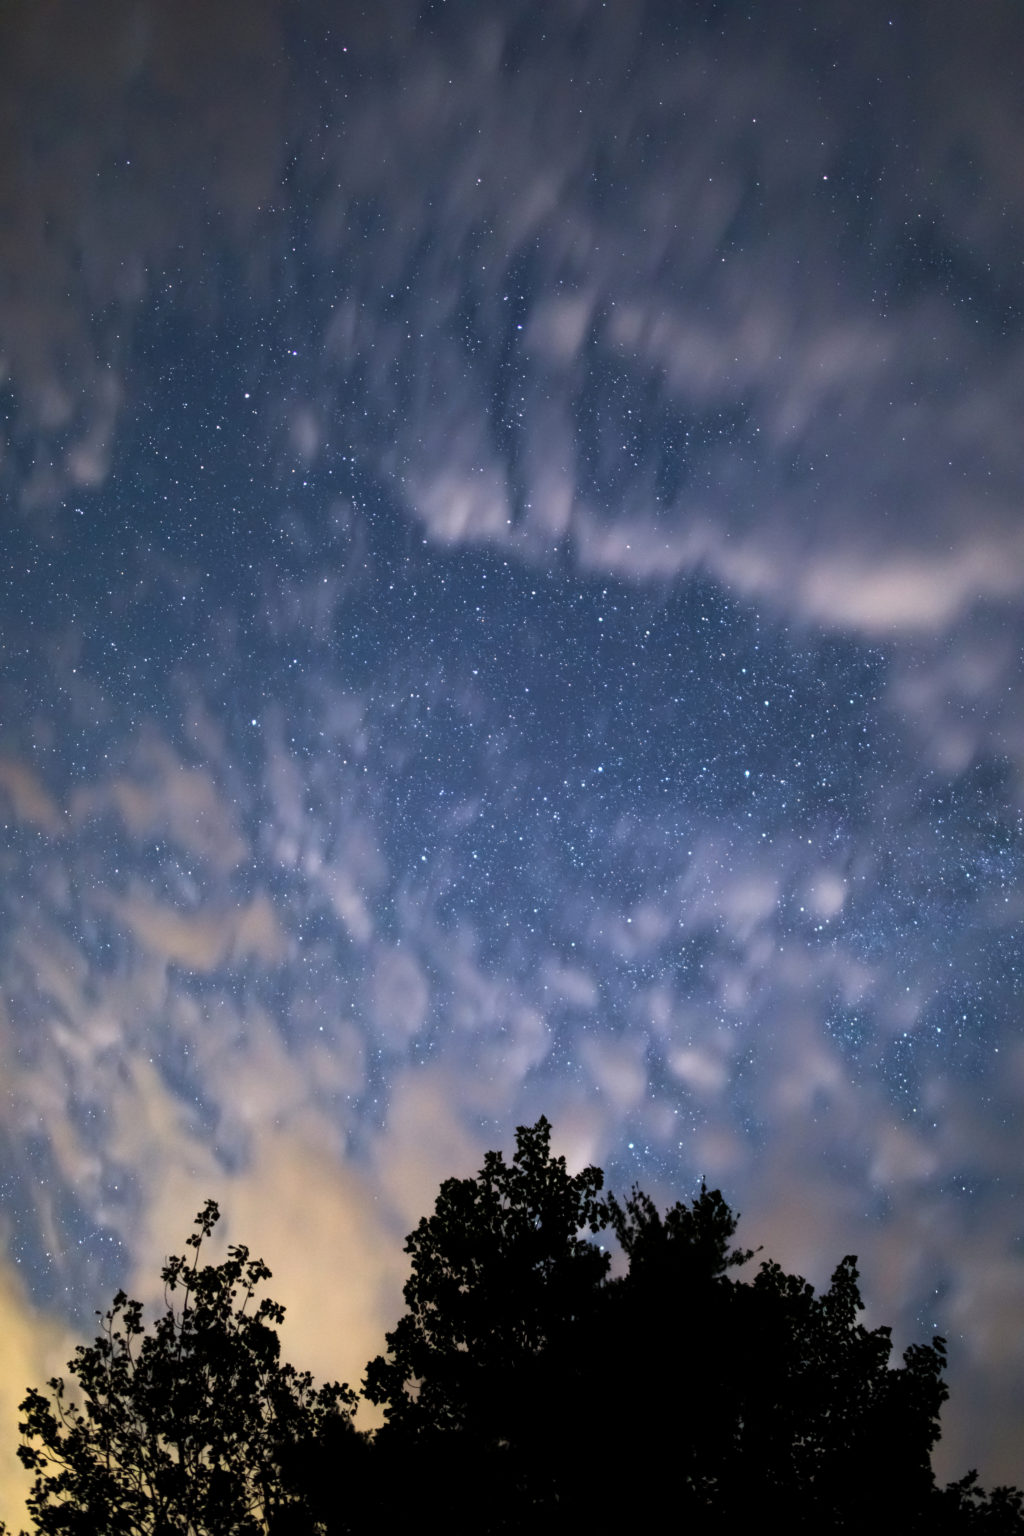 Glowing Clouds on a Summer Night